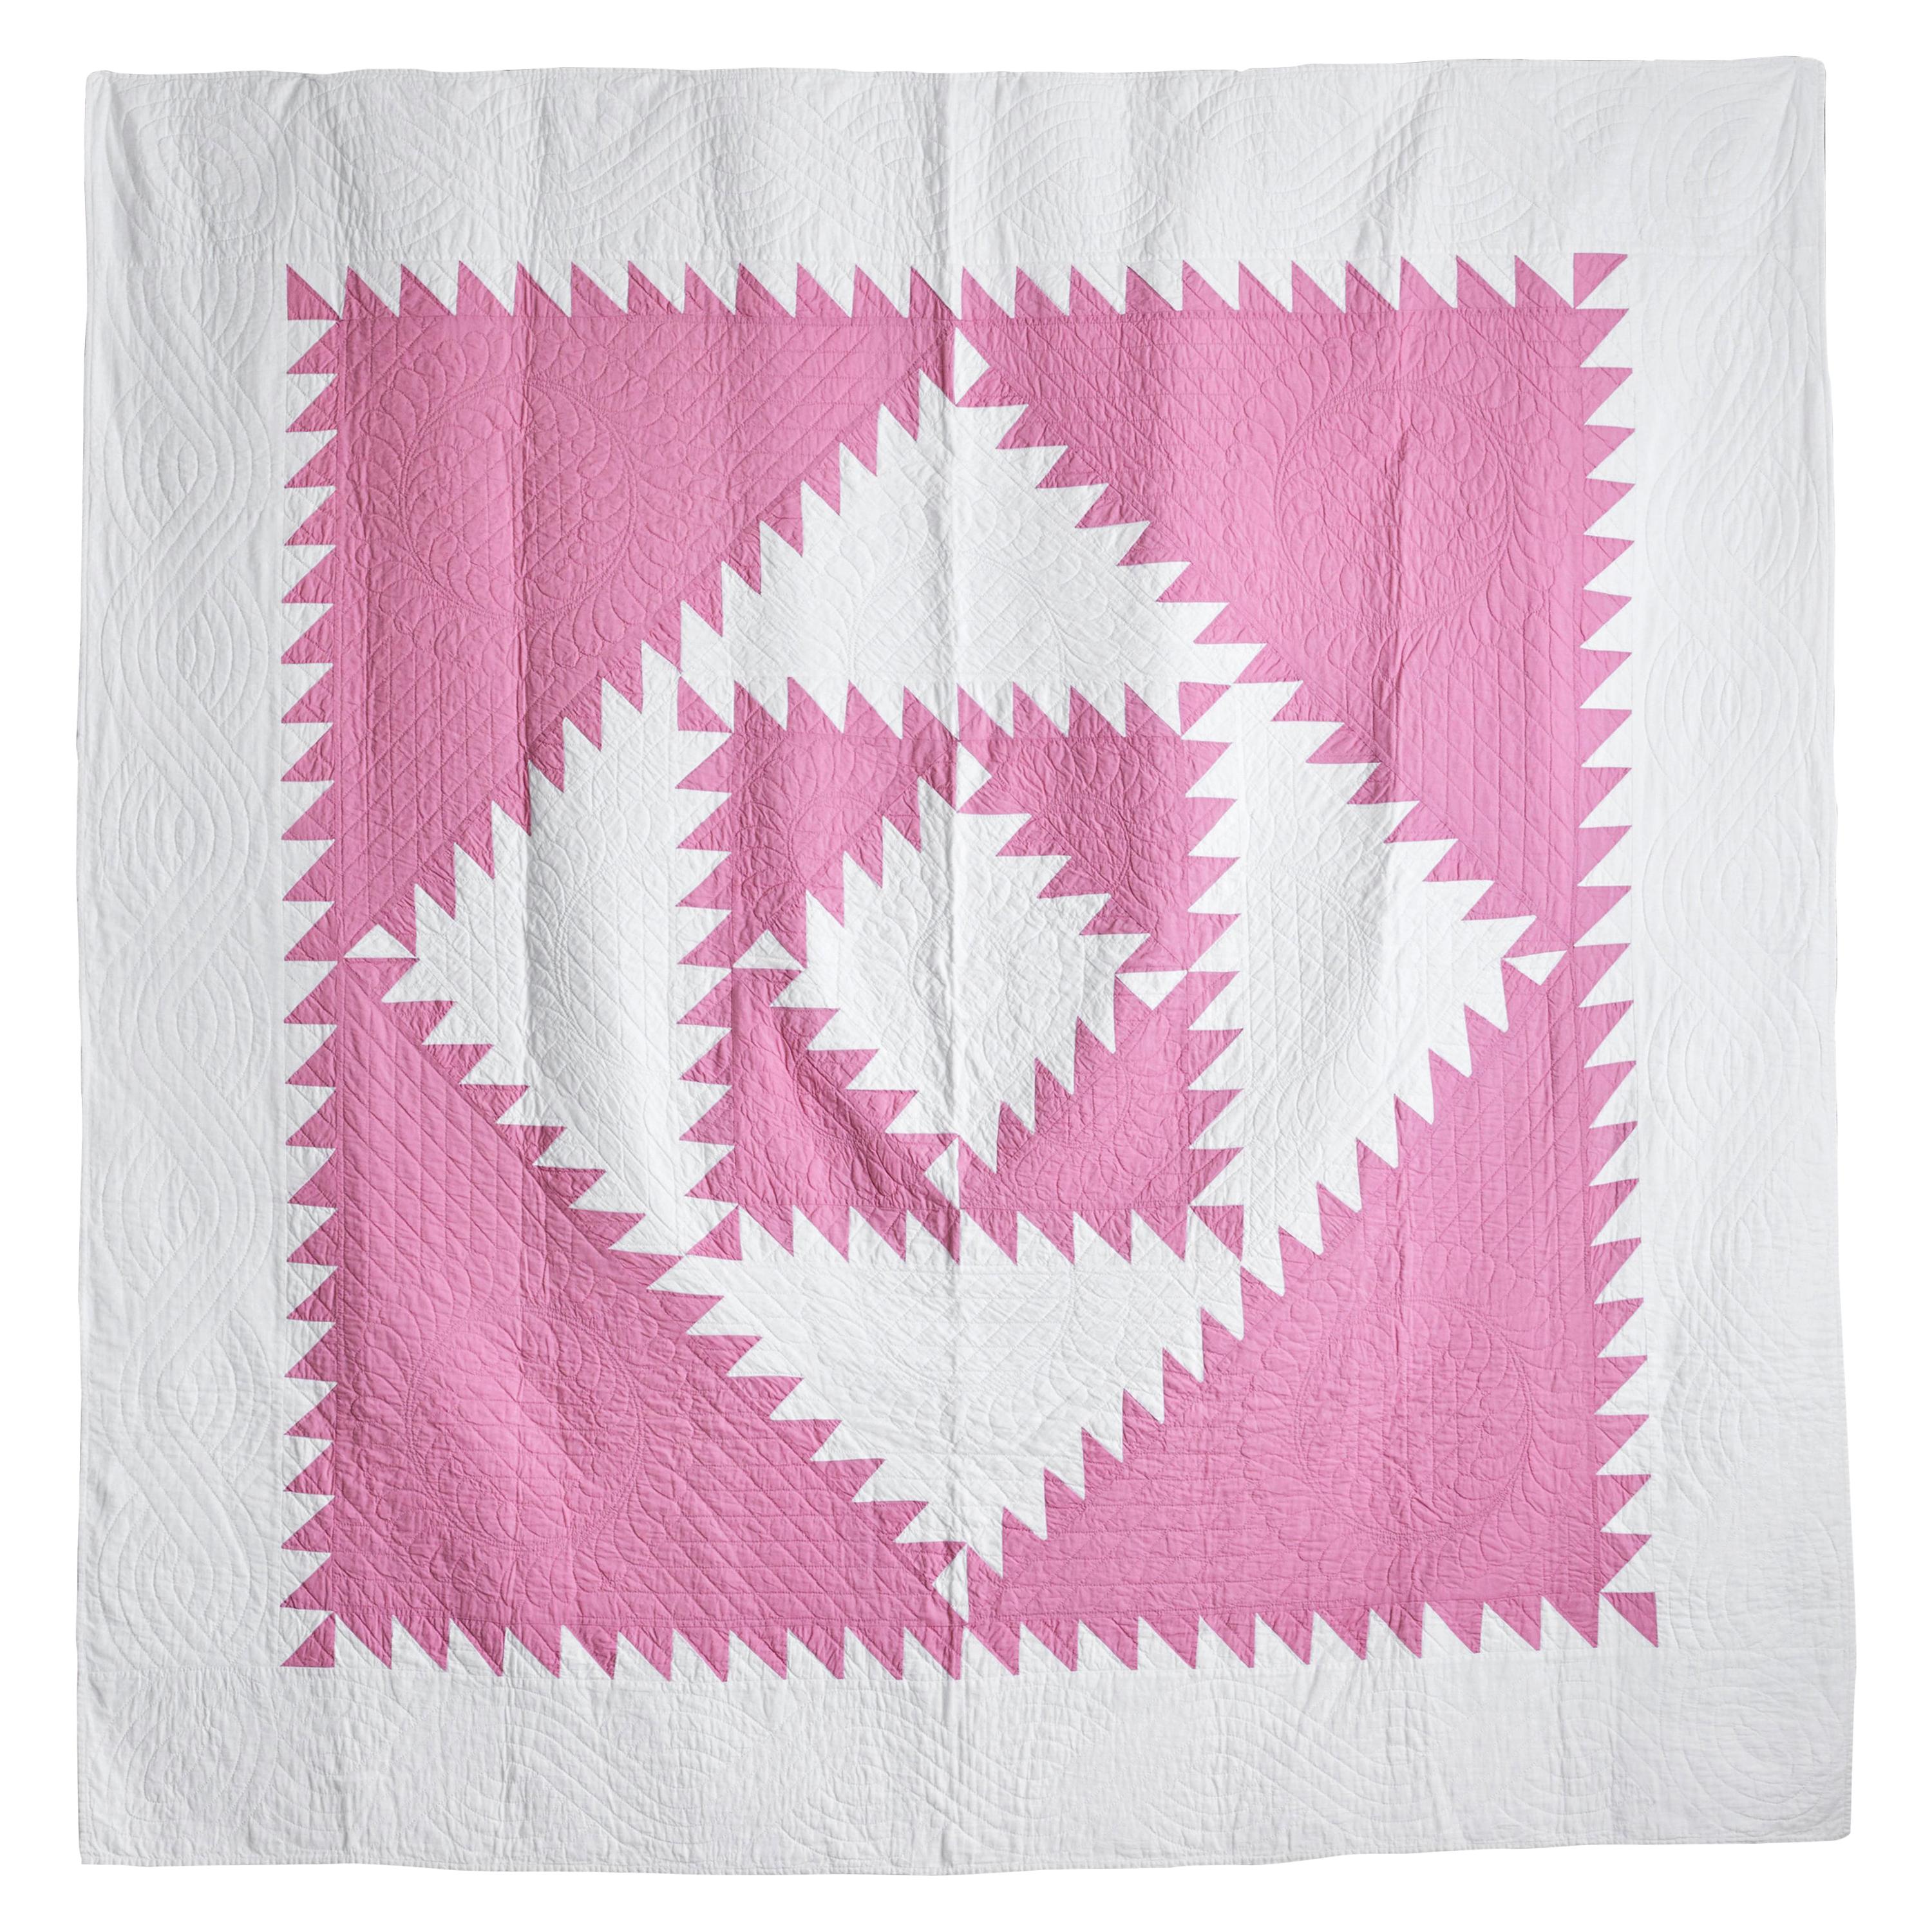 Vintage Patchwork Diamond Quilt in Pink and White, USA, 1930s